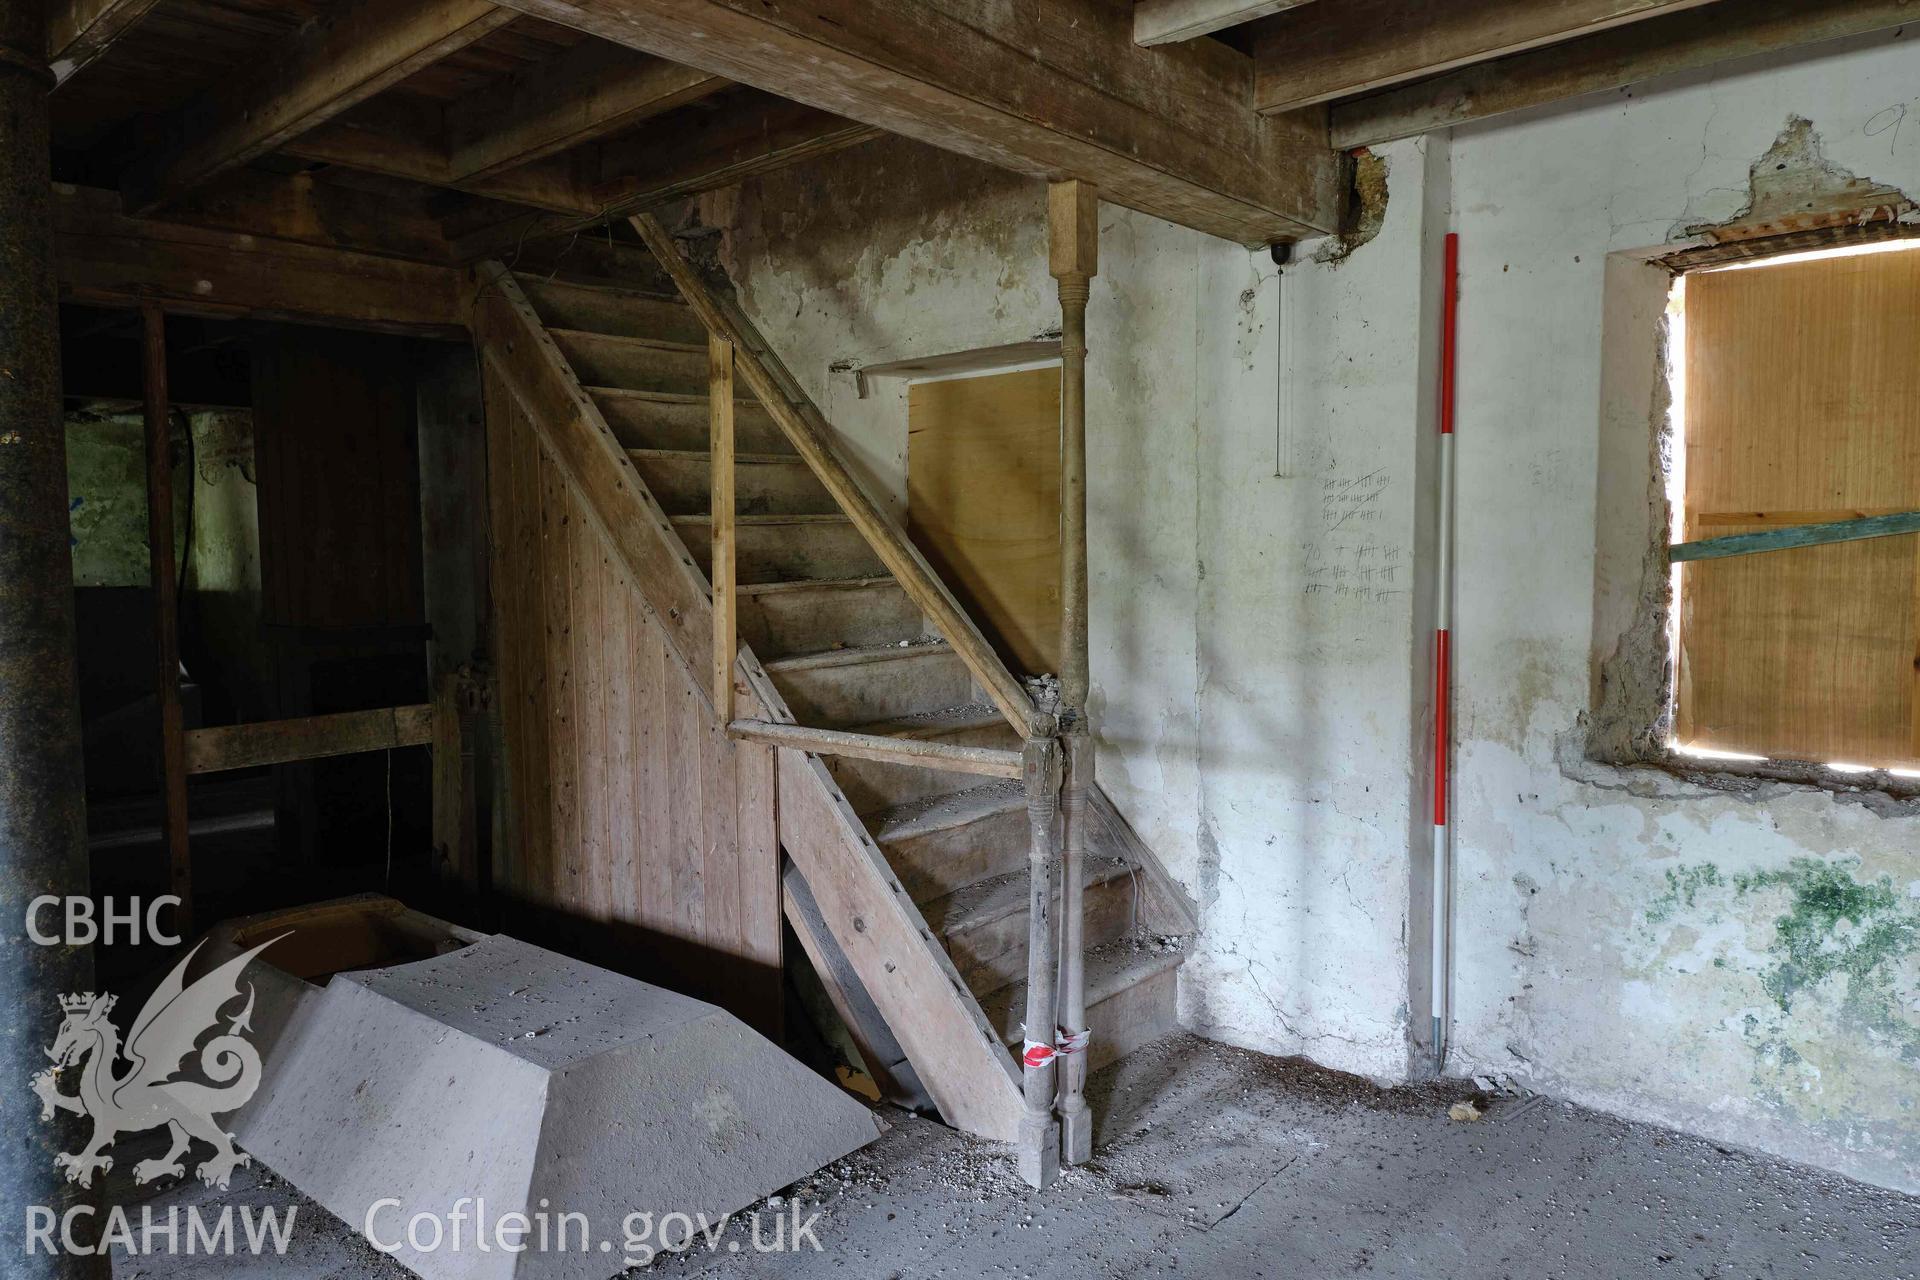 Colour photograph showing Blackpool Mill - 2nd floor, stair to 3rd floor, looking SE. Produced as part of Historic Building Recording for Blackpool Mill, carried out by Richard Hayman, June 2021.